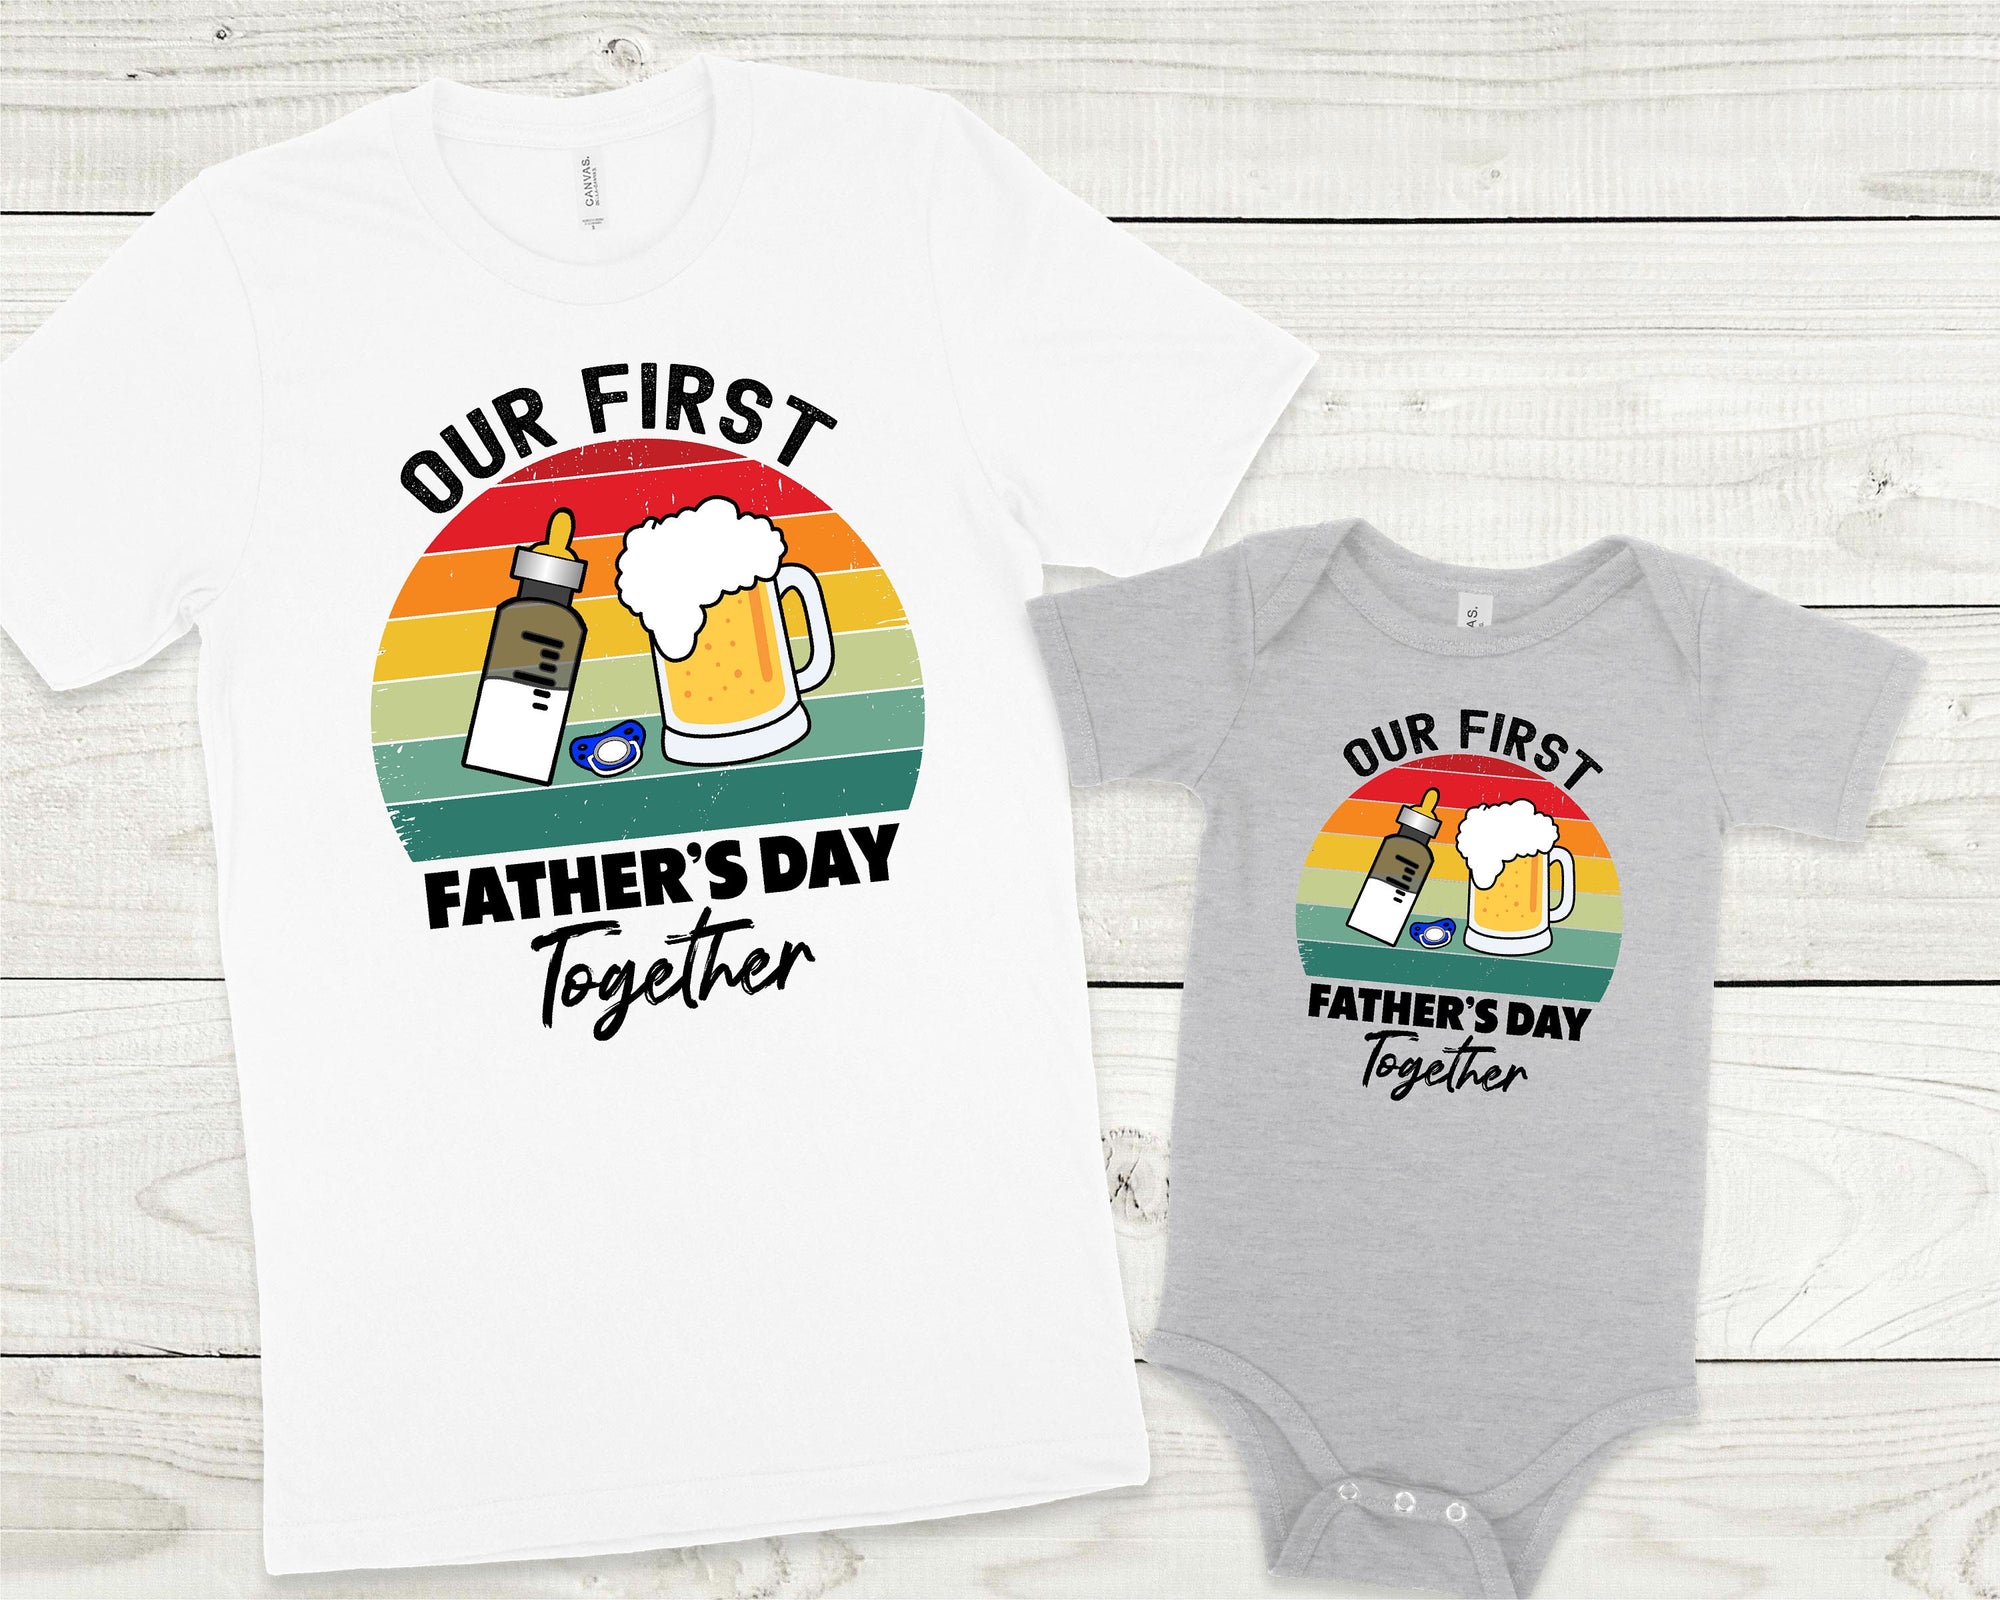 Our First Father's Day Together T-Shirt, Matching Father's Day, Drinking Buddies T-Shirt, Our 1st Father's Day, Father's Day Gift